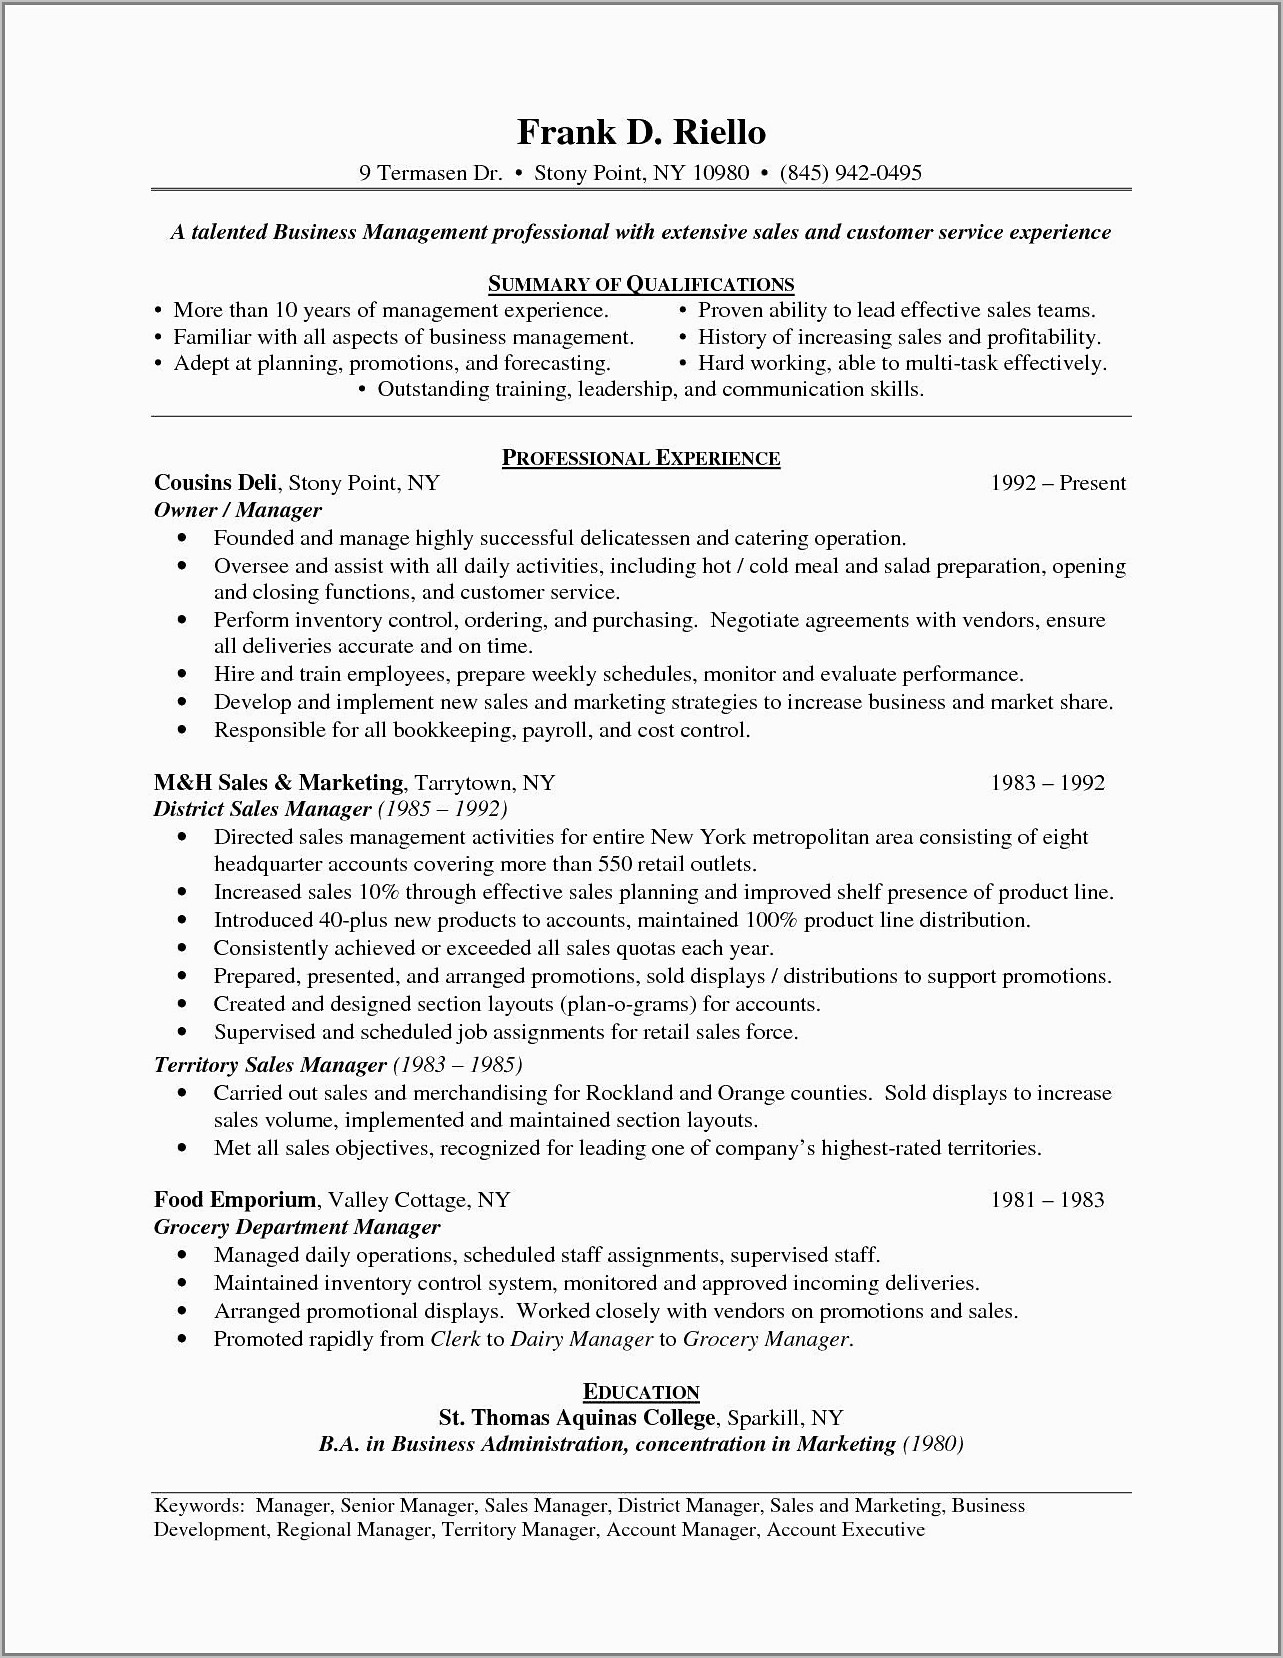 Resume Sample For Executives